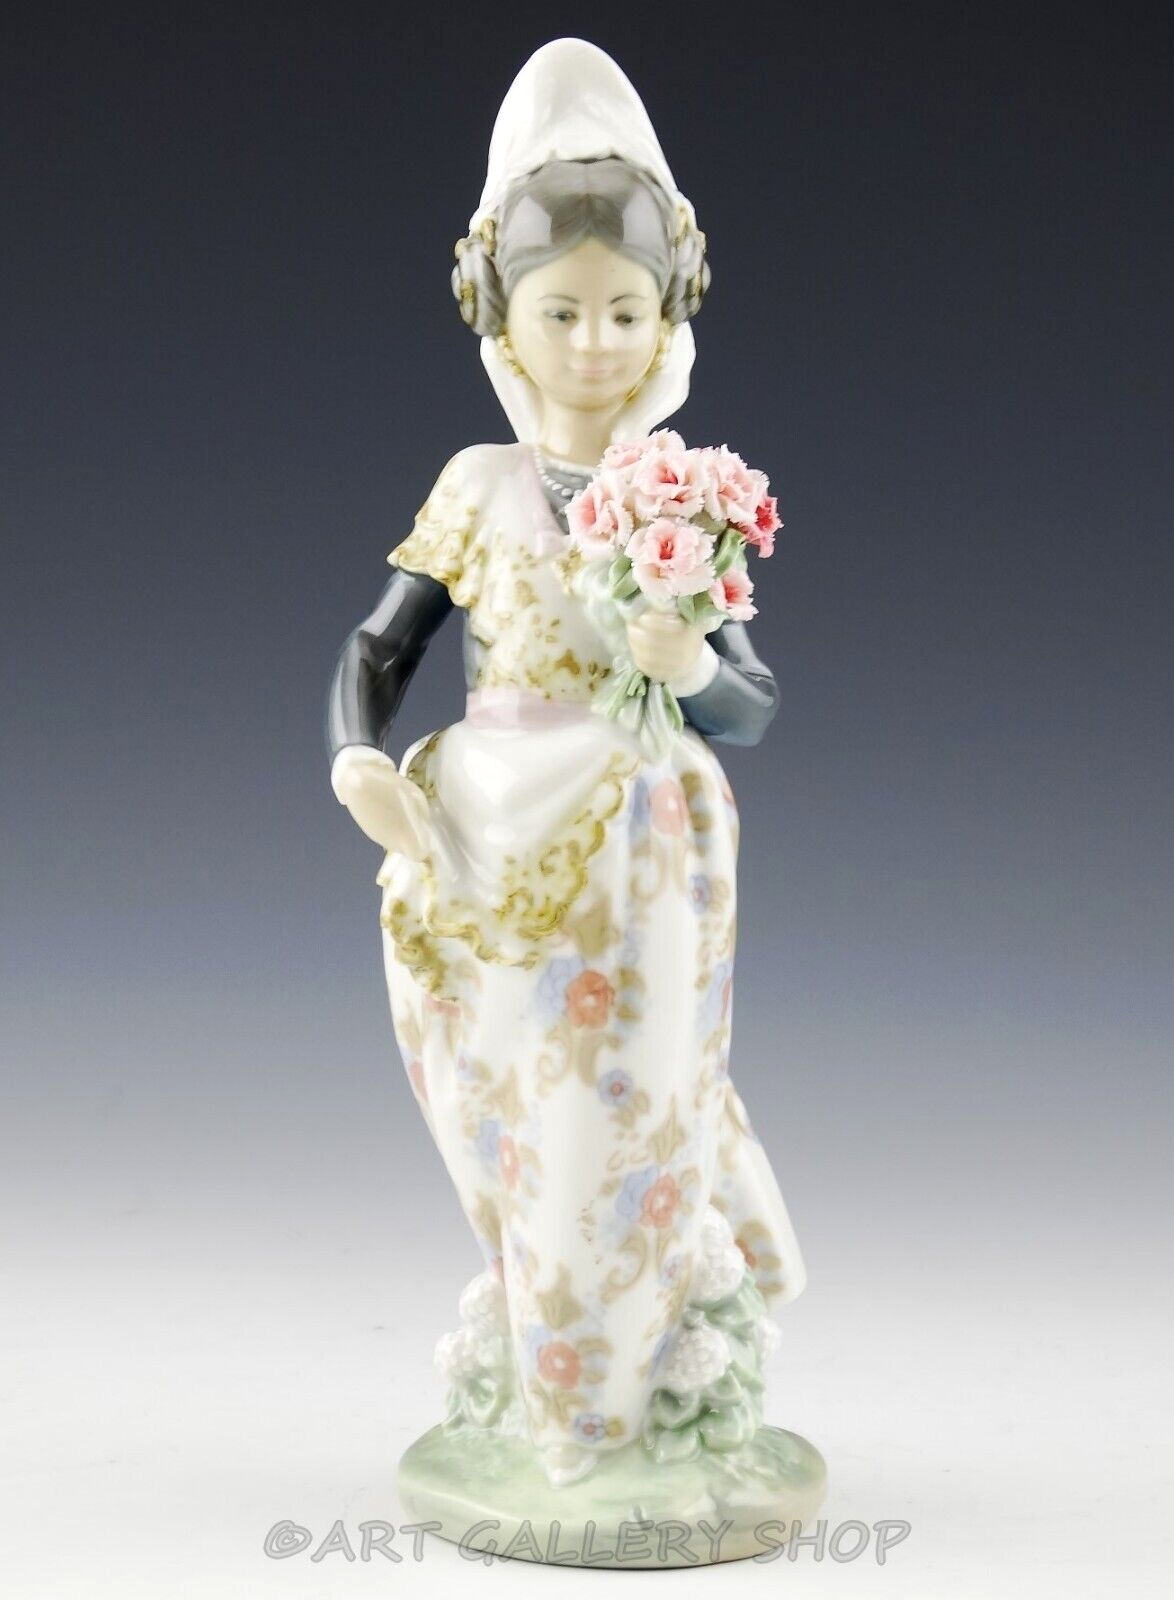 Lladro Figurine VALENCIAN GIRL WITH FLOWERS LADY DANCER #1304 Retired Mint